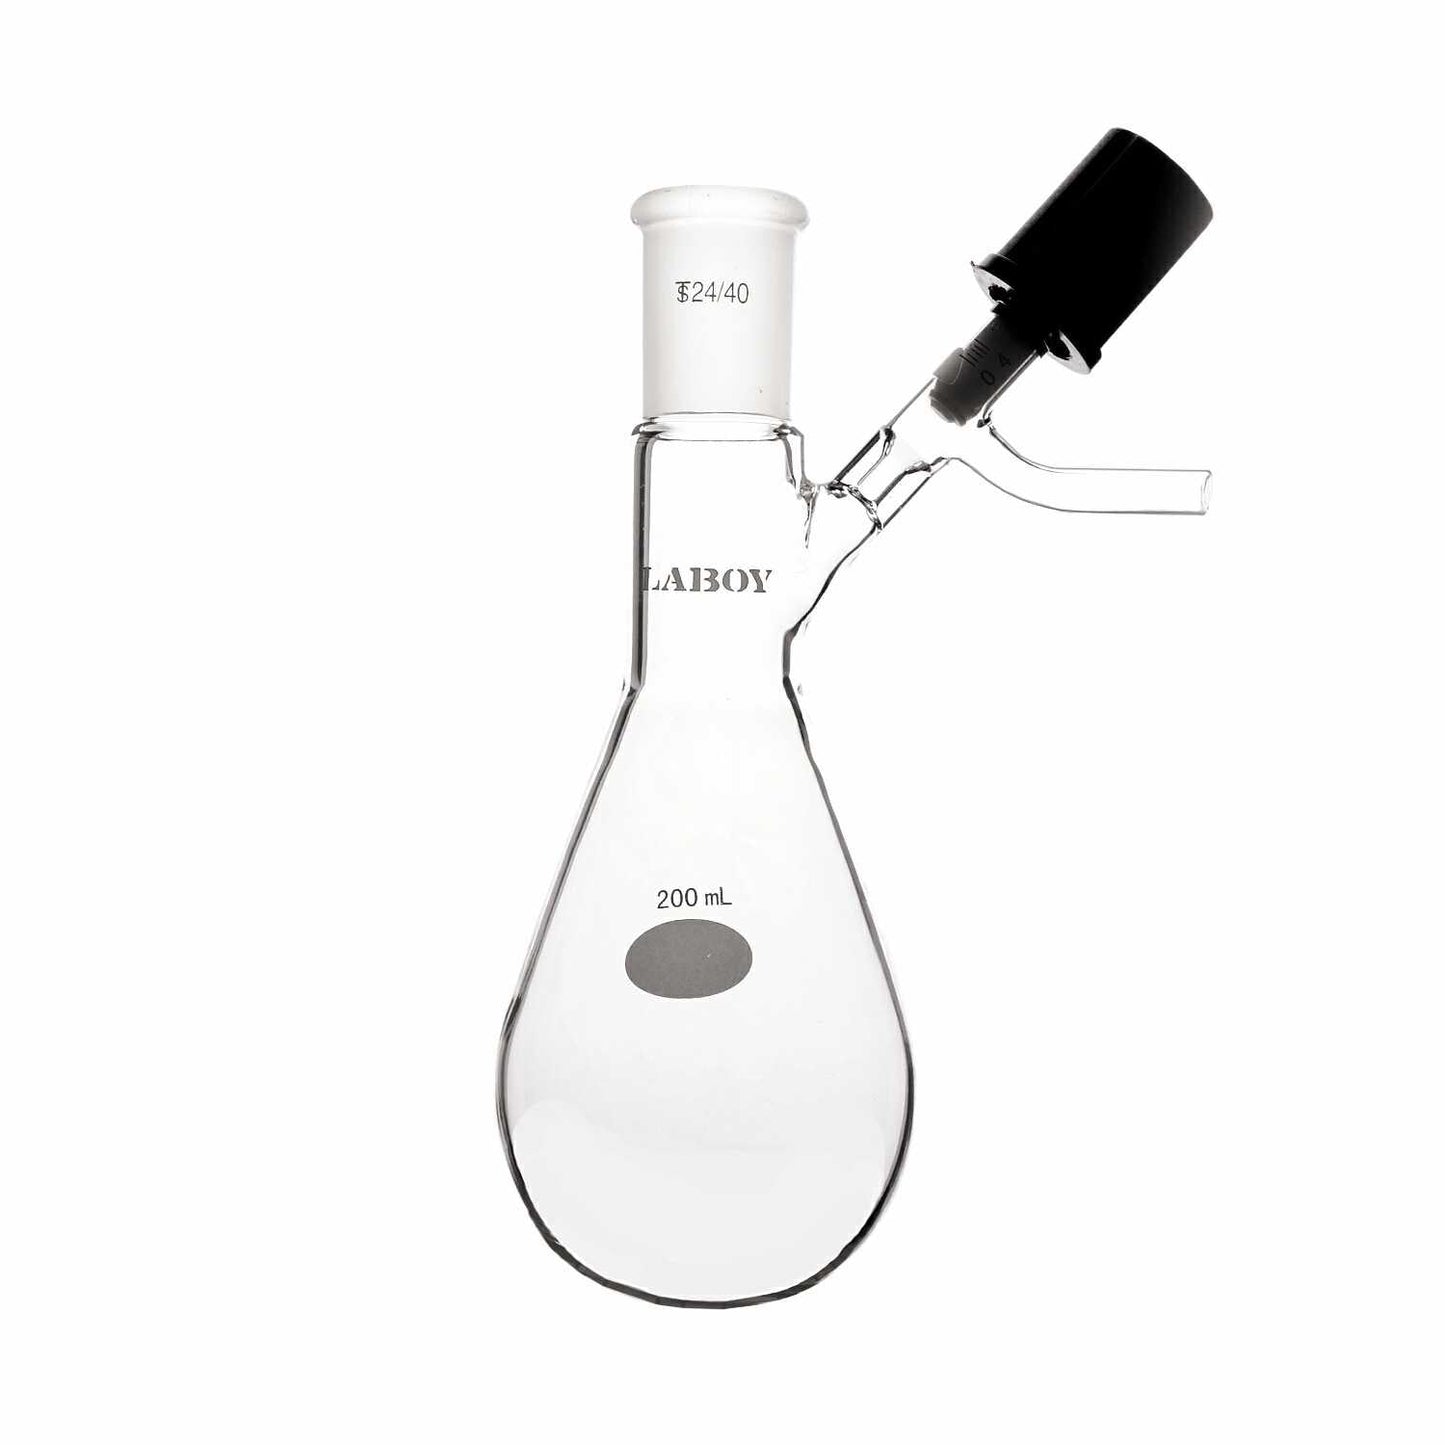 Schlenk Flask 200mL With High Vaumm Valve And 24/40 Glass Outer Joint At Top